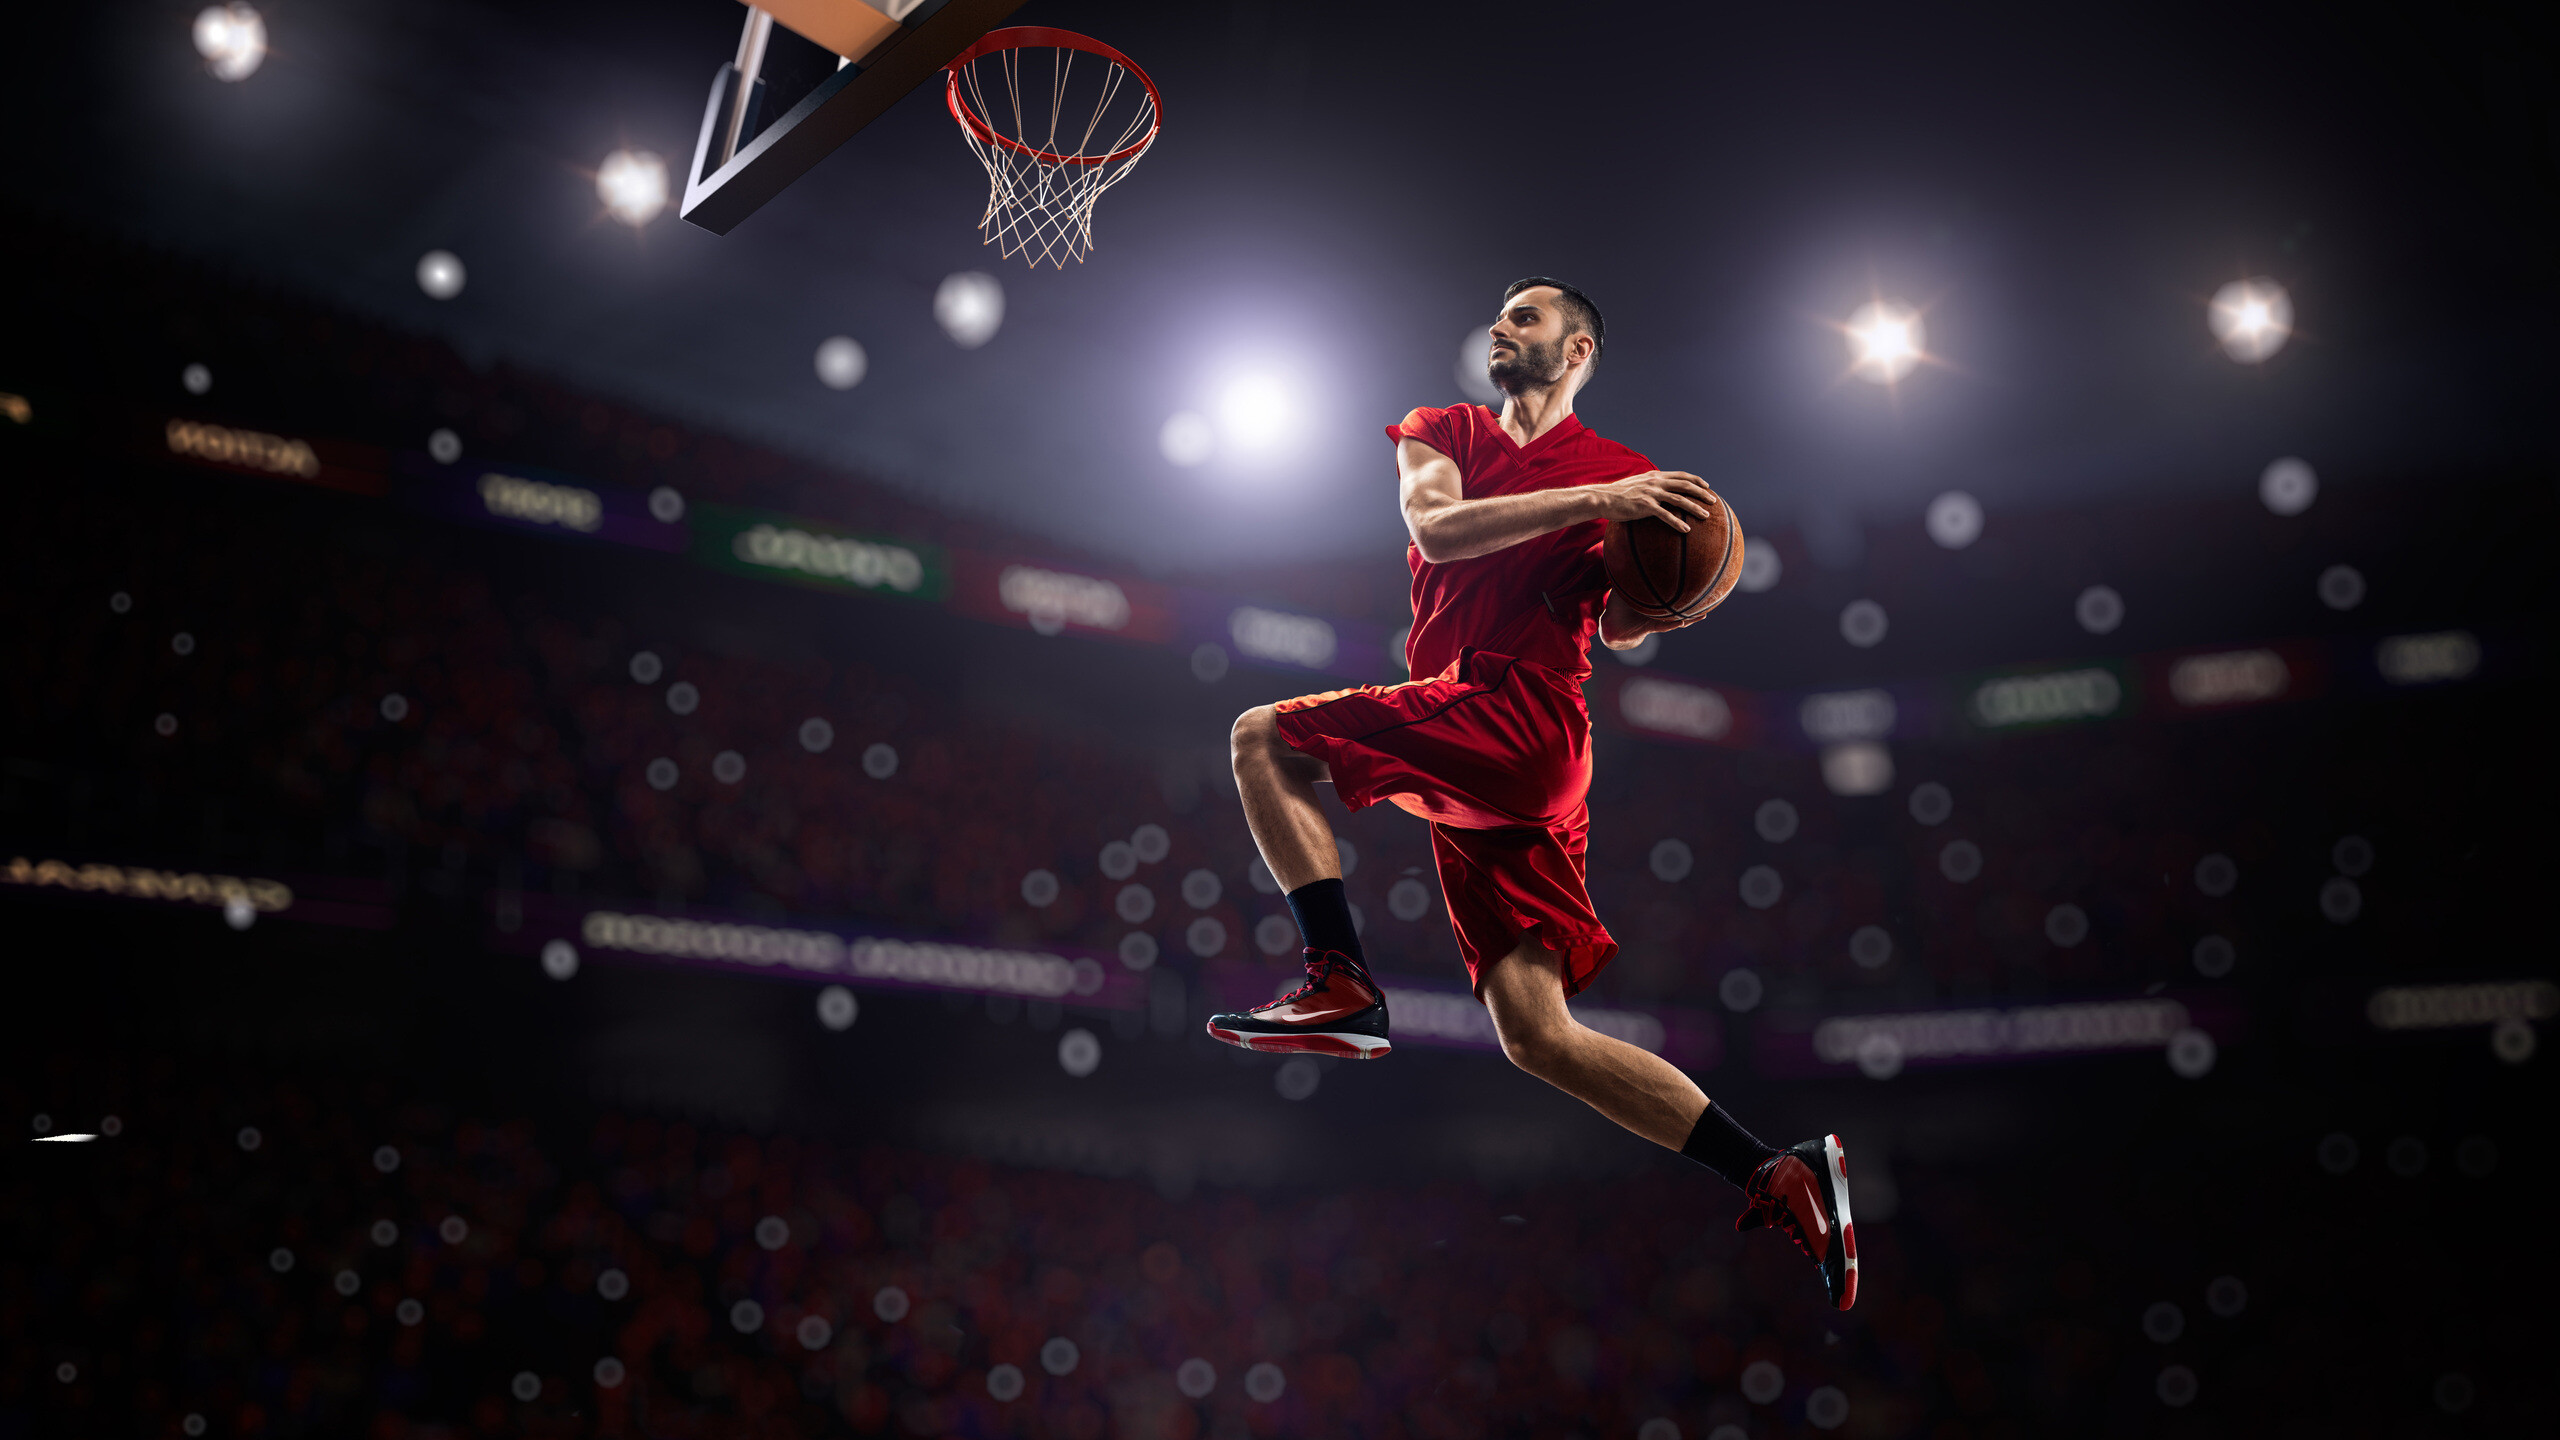 Goal (Sports): Basketball player in action, Shooting a basketball through the hoop. 2560x1440 HD Background.